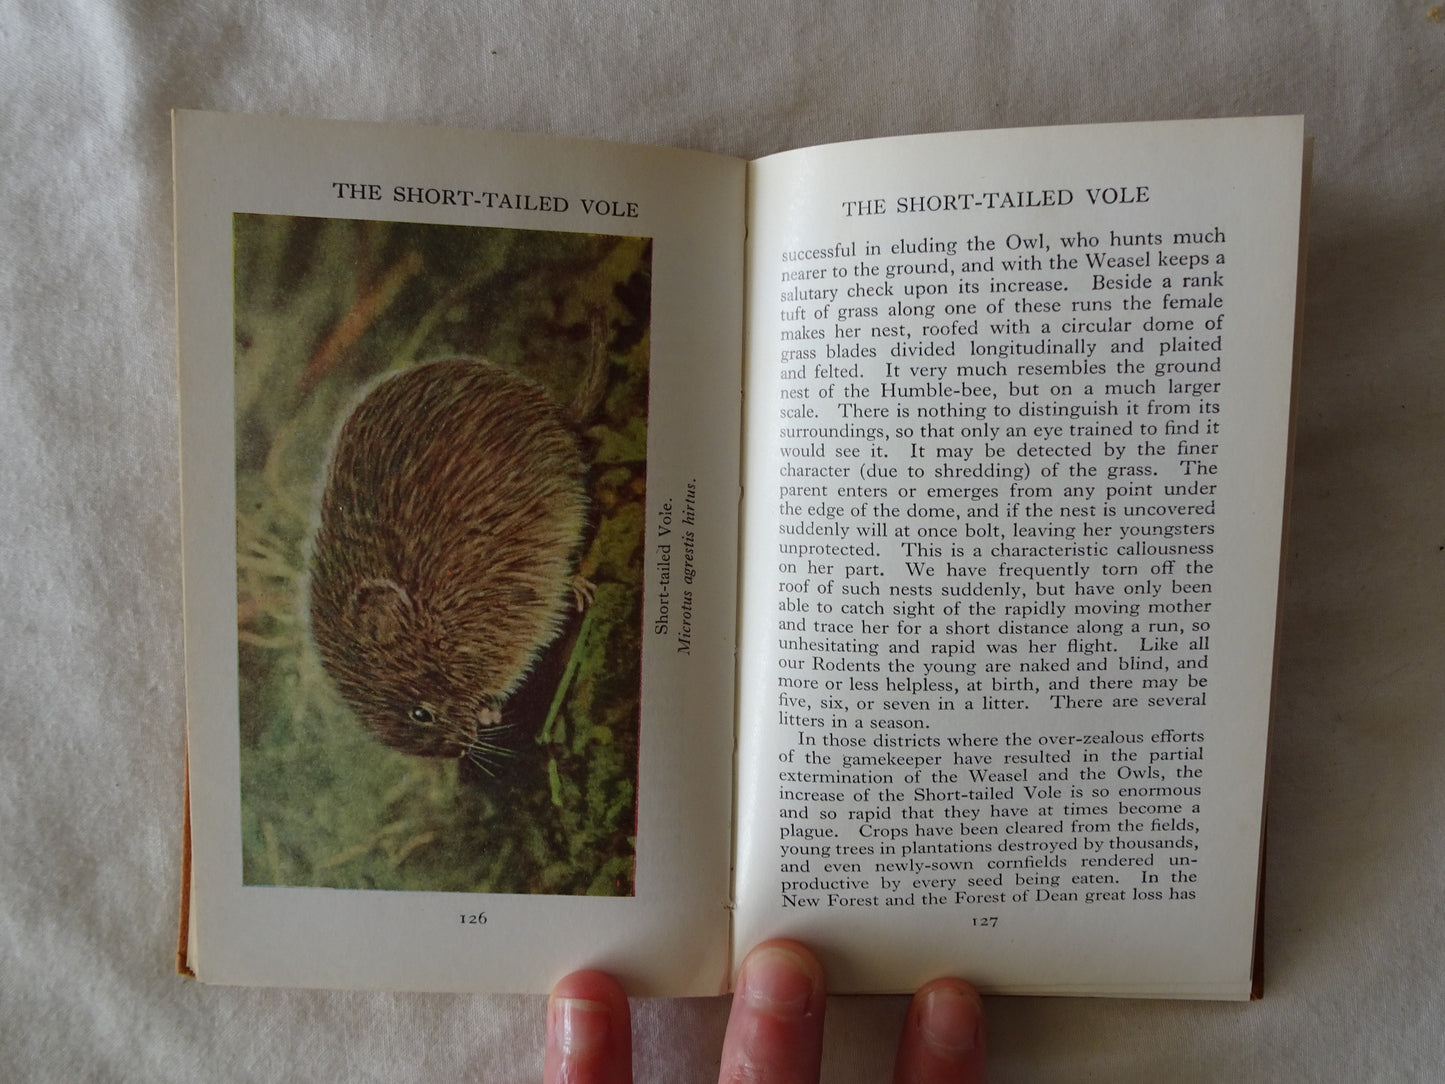 The Observer's Book of Wild Animals of the British Isles by W. J. Stokoe